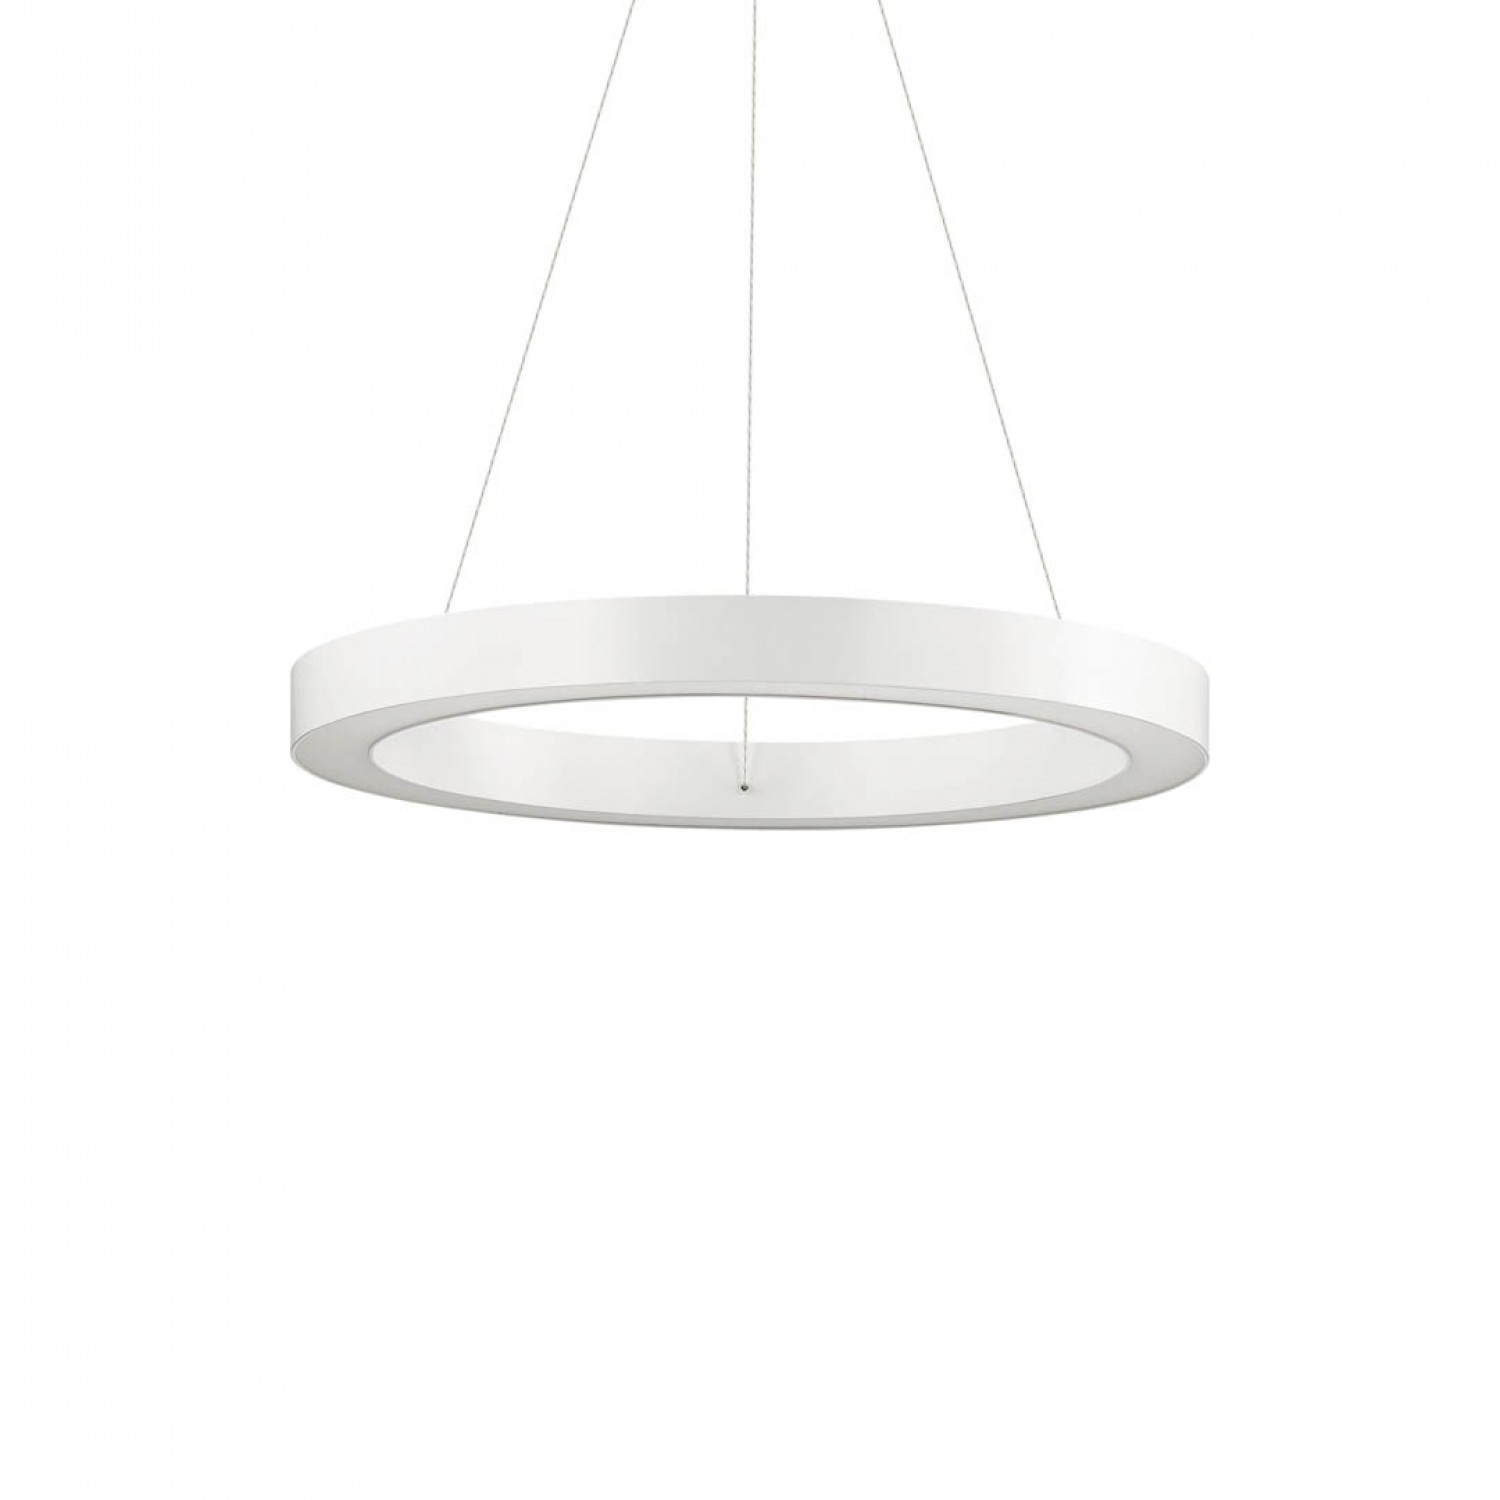 alt_image Люстра Ideal Lux ORACLE D50 ROUND BIANCO 211404